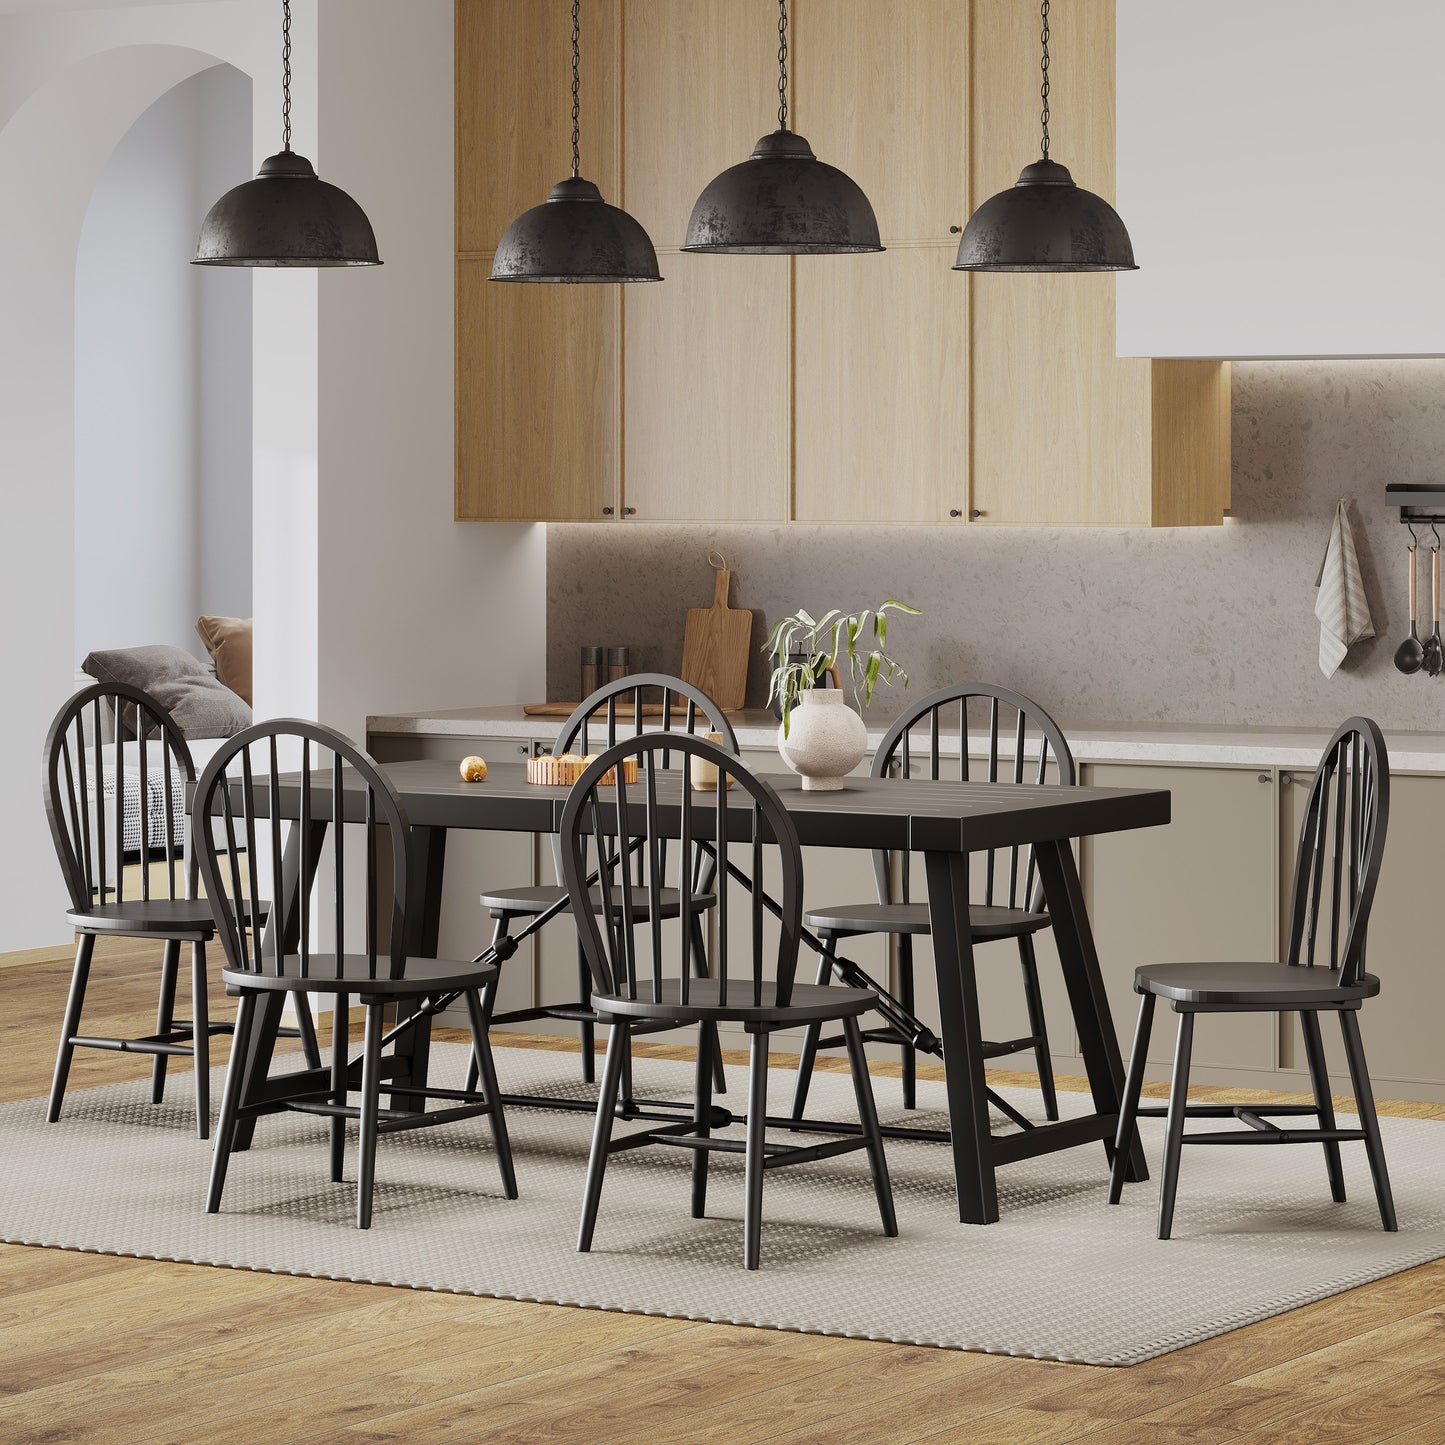 Southview Contemporary Iron and Wood 7 Piece Dining Table, Black